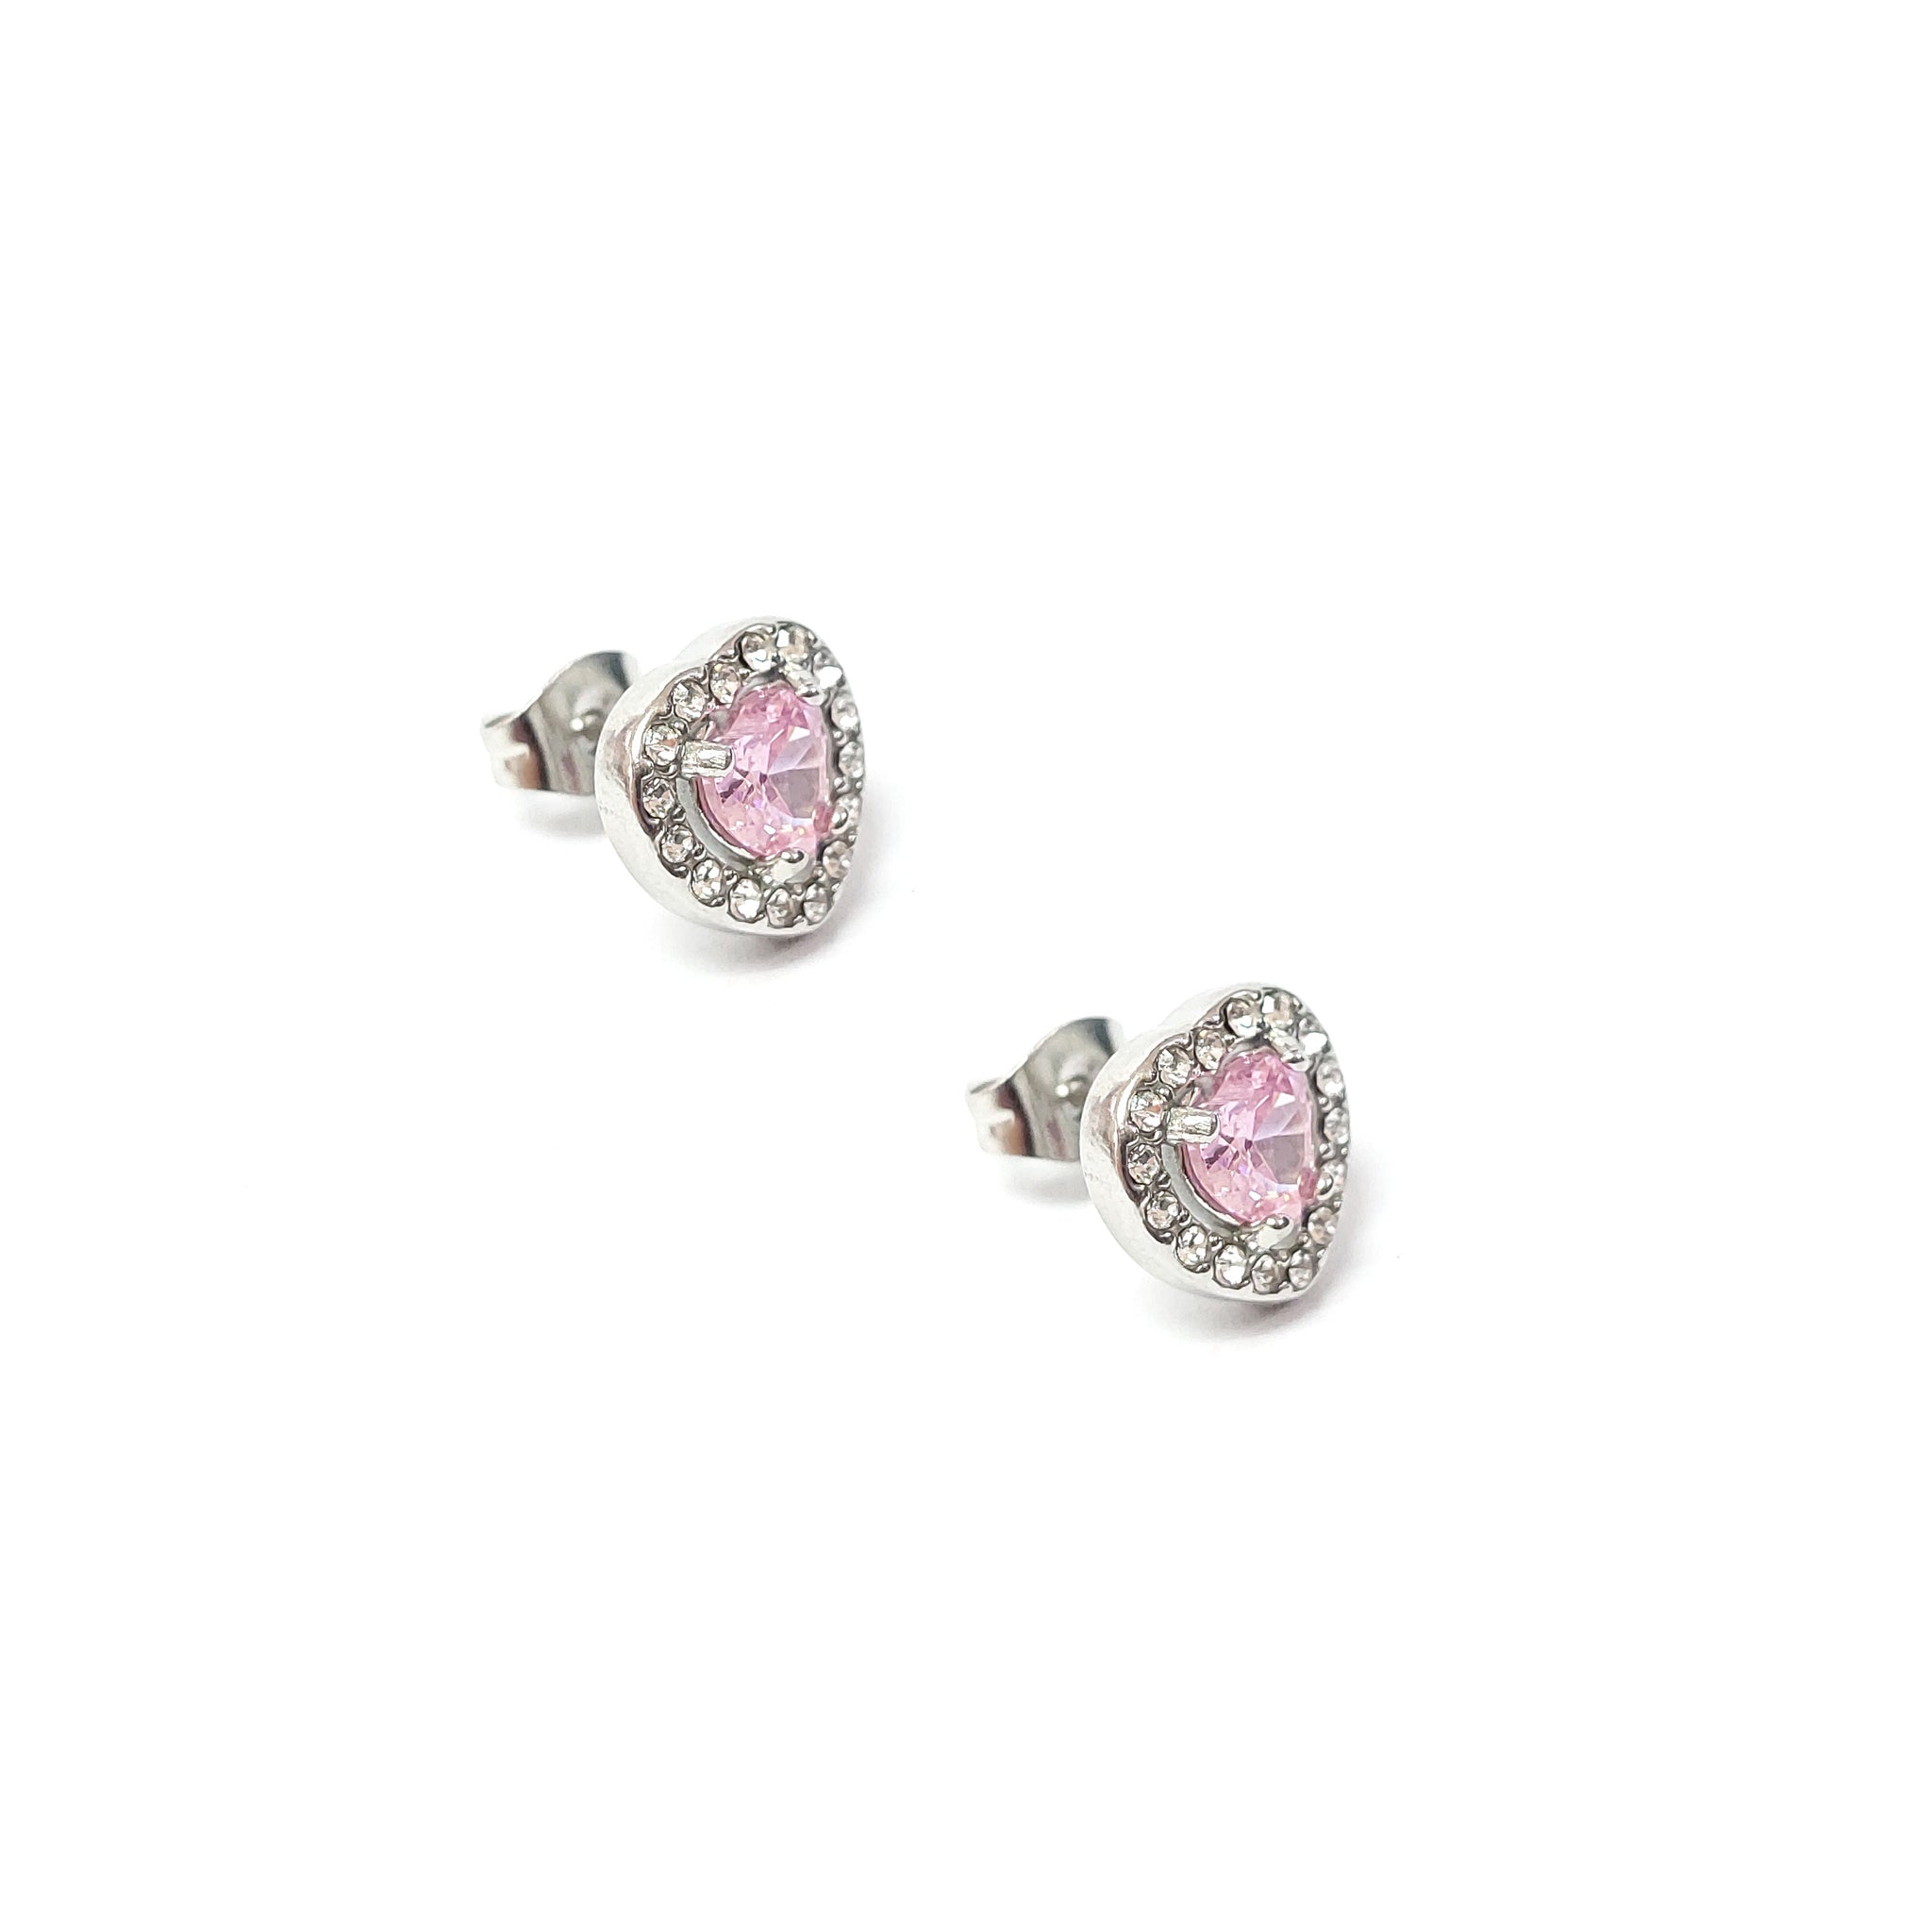 ESE 7931: Enclosed Cz-Studded Baby Pink Heart Cz Earrings